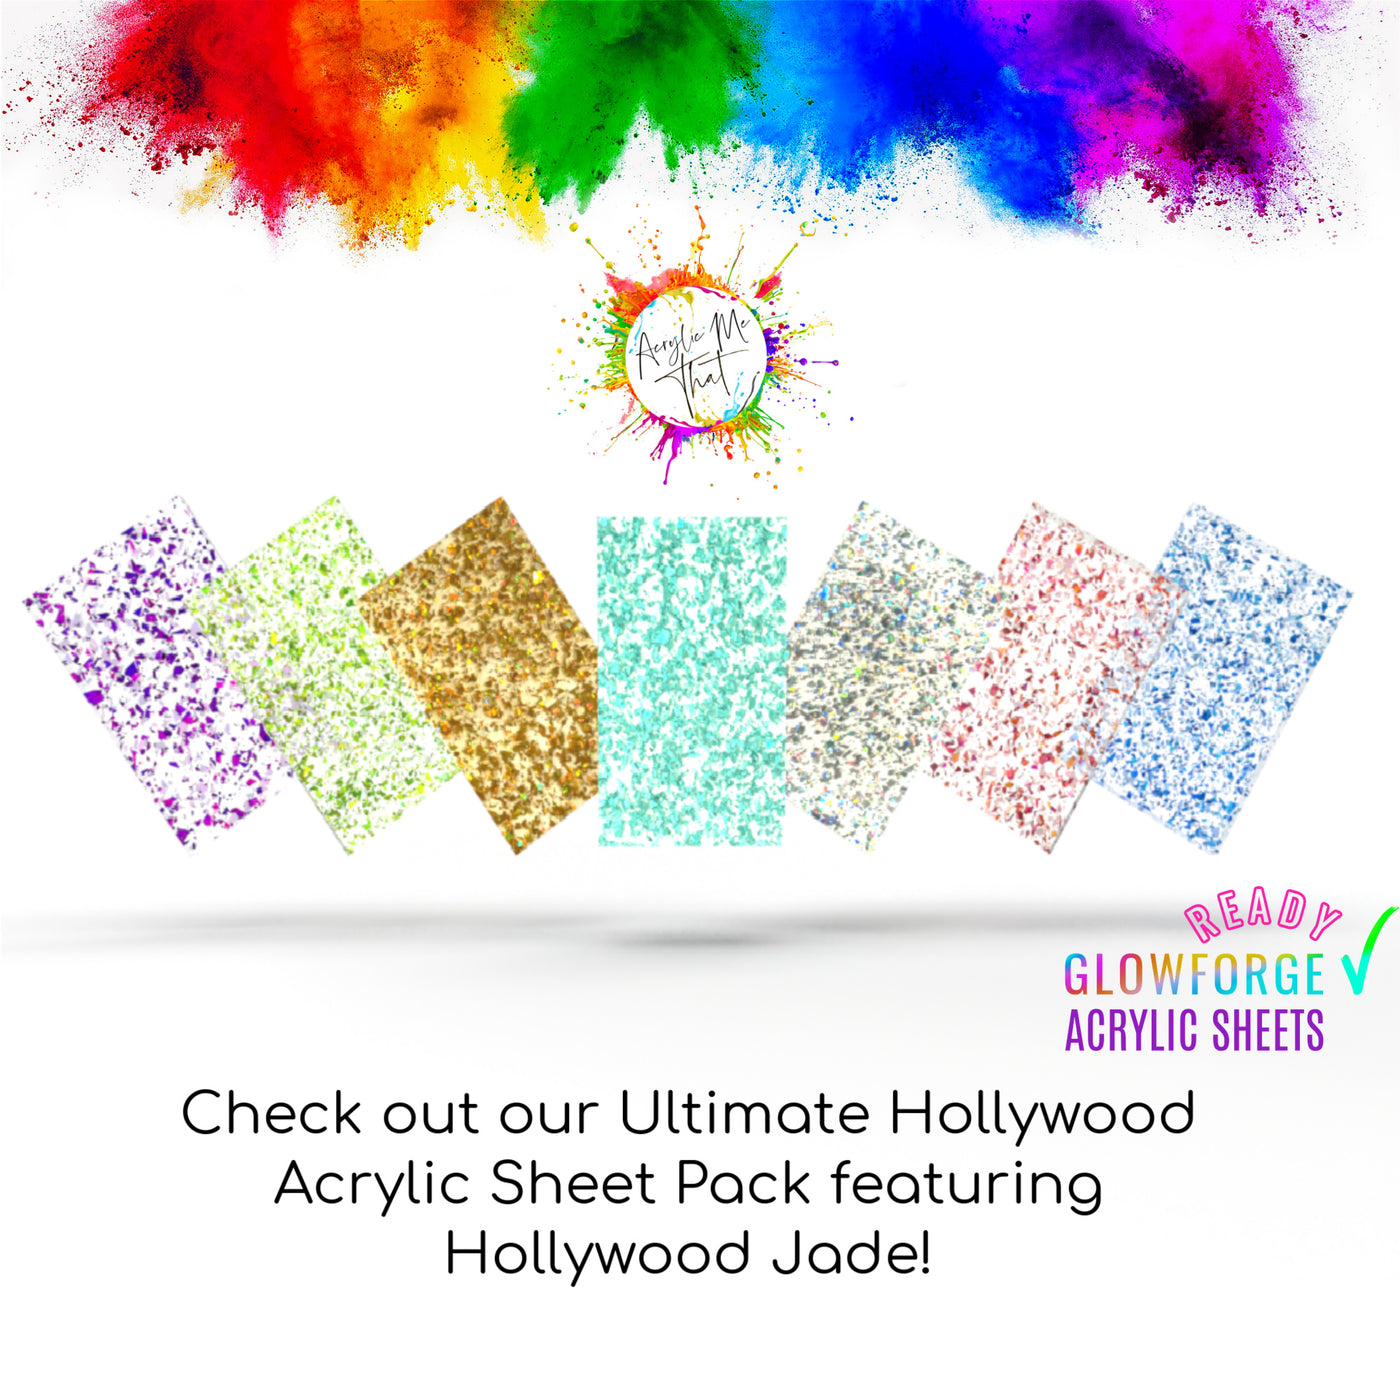 Sparkling Colorful Glitter Acrylic for Crafting, Glowforge & Lasering